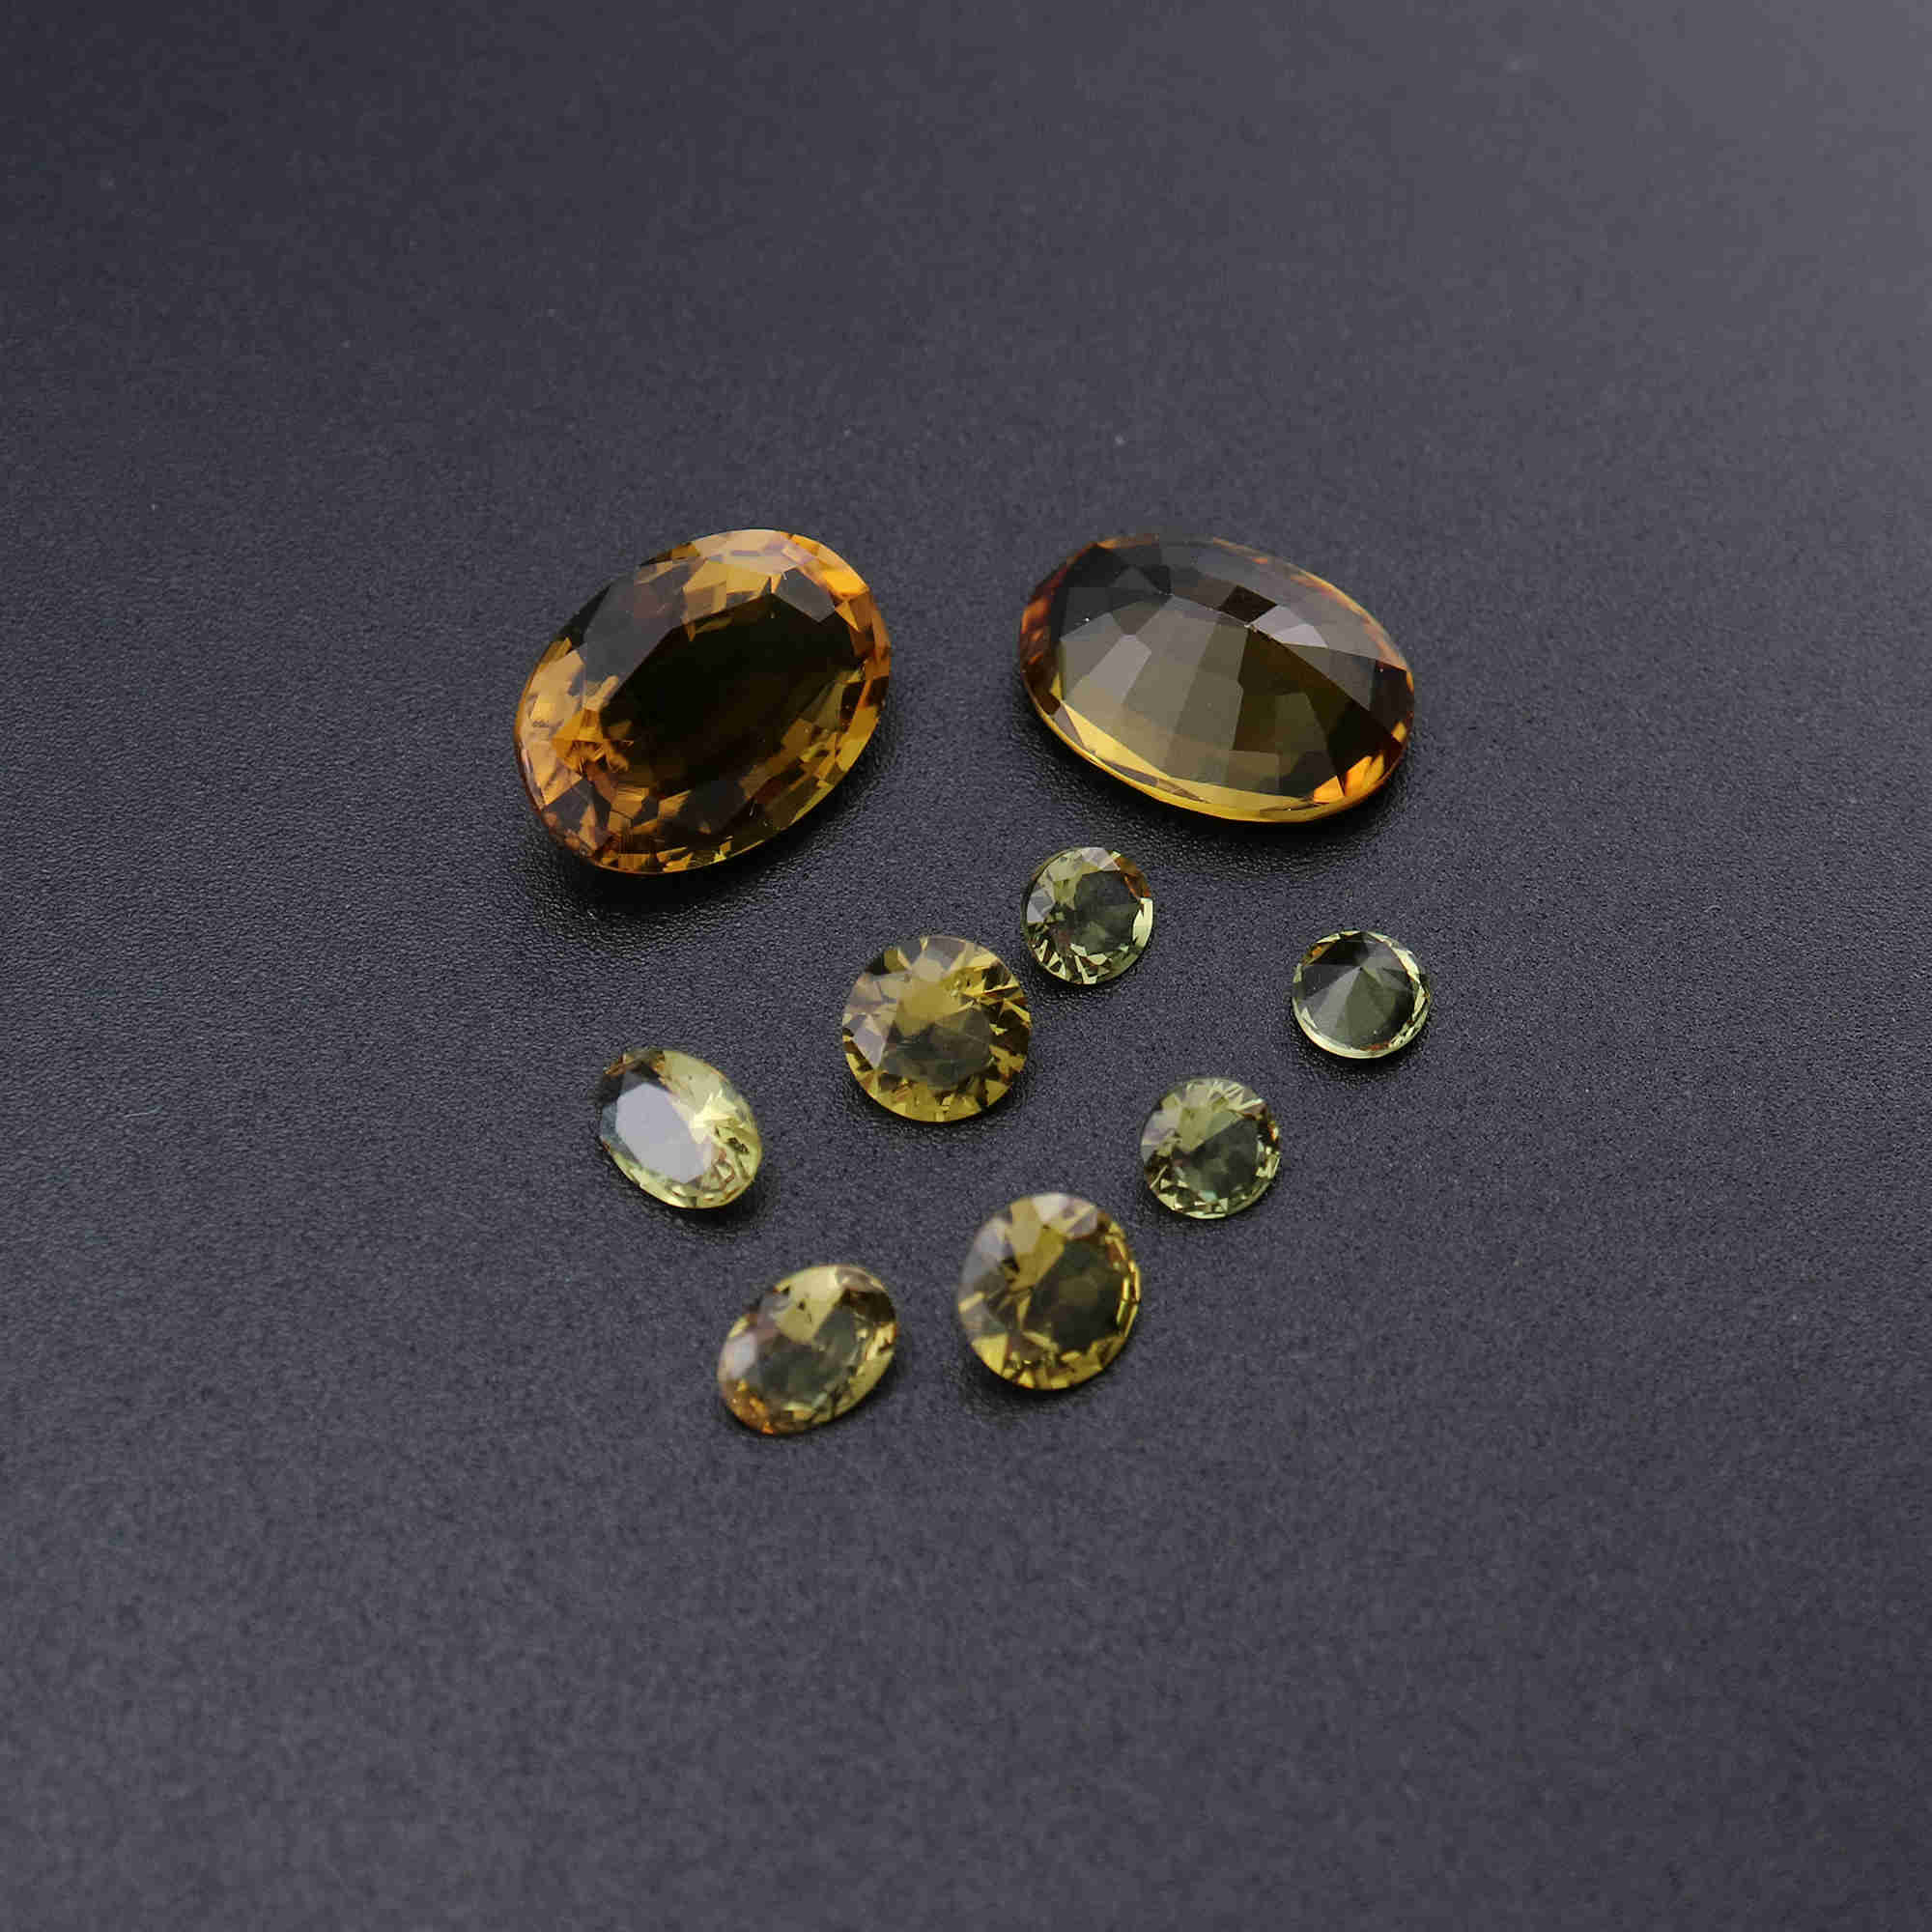 Multiple size cabochons, Faceted sharp back, Lab-created diaspore, Gemstone DIY, 2000x2000 HD Handy